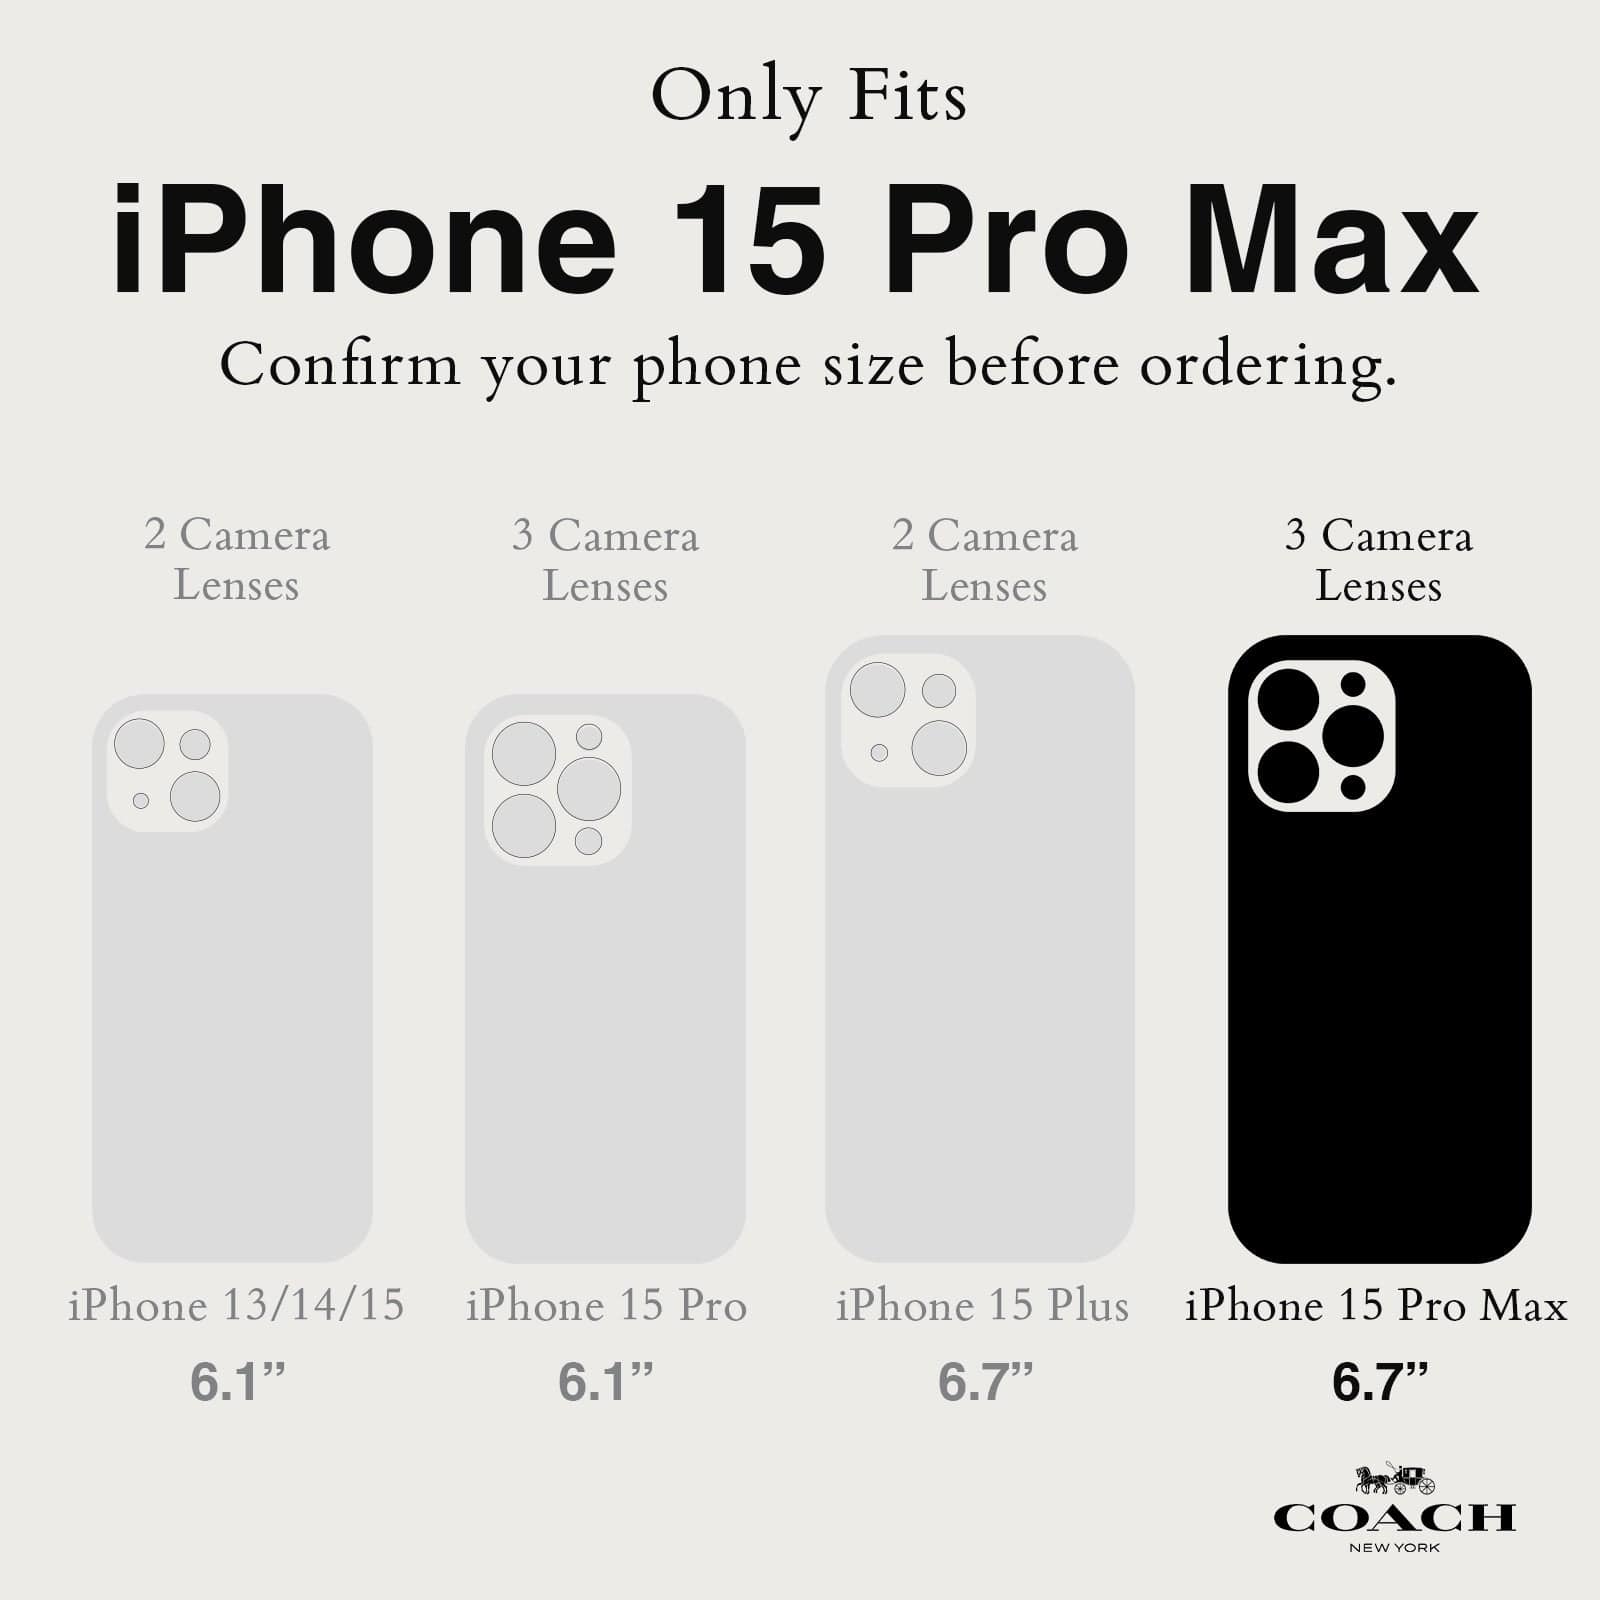 ONLY FITS IPHONE 15 PRO MAX. CONFIRM YOUR PHONE SIZE BEFORE ORDERING.